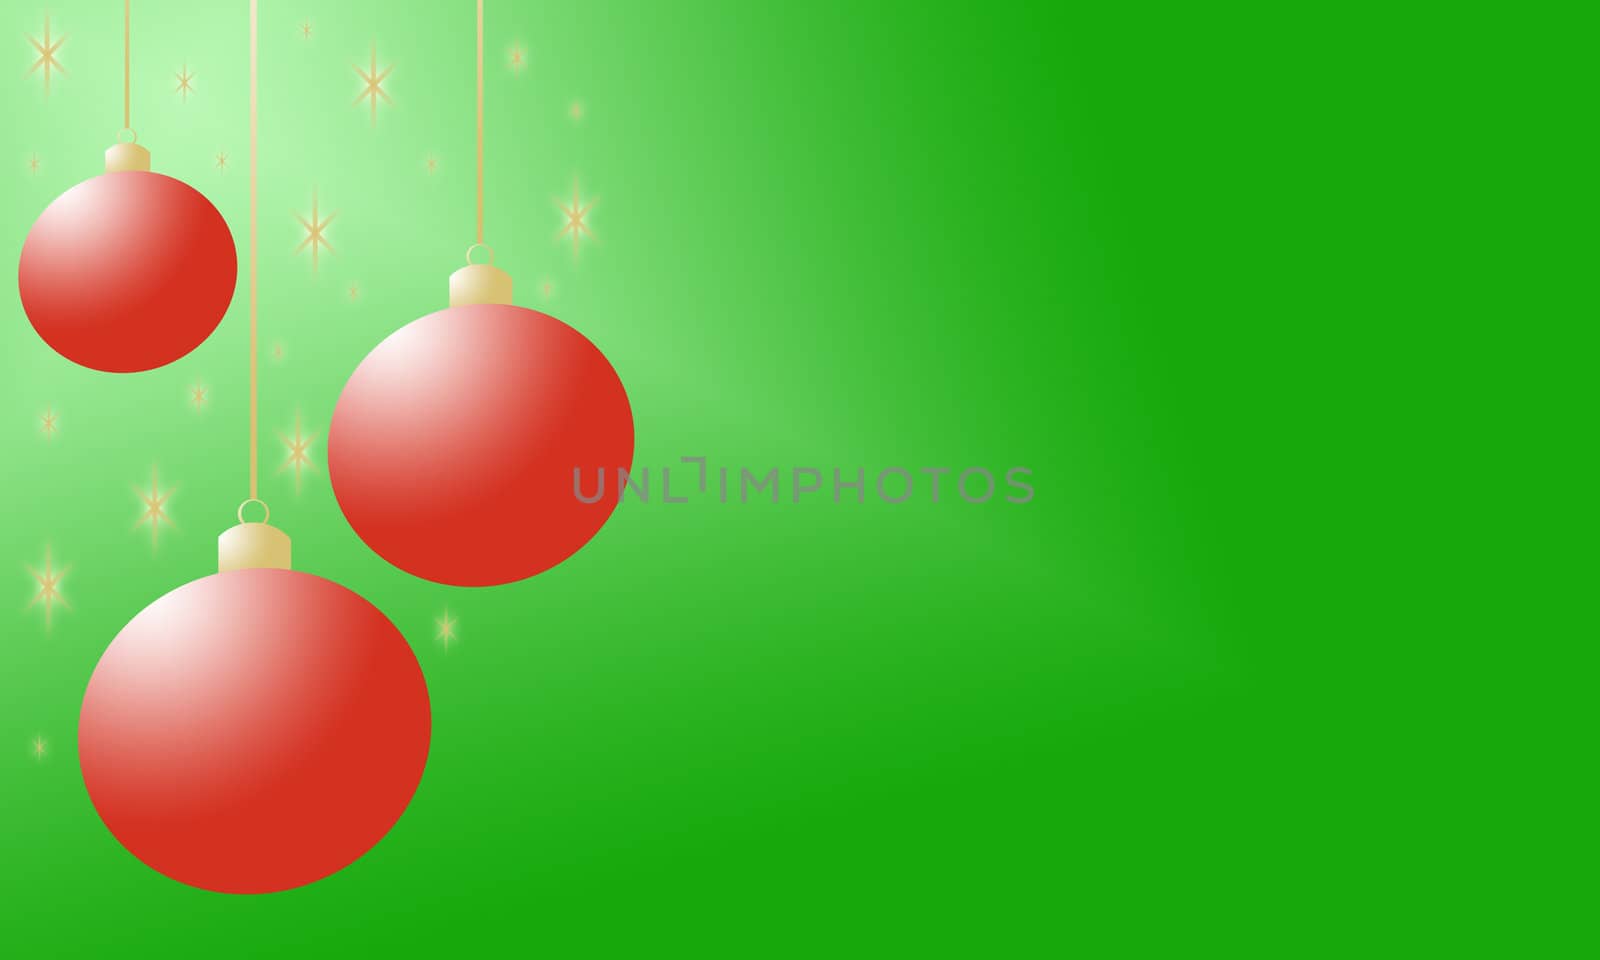 Abstract holiday background with red Christmas ornaments and glowing gold stars on a green background